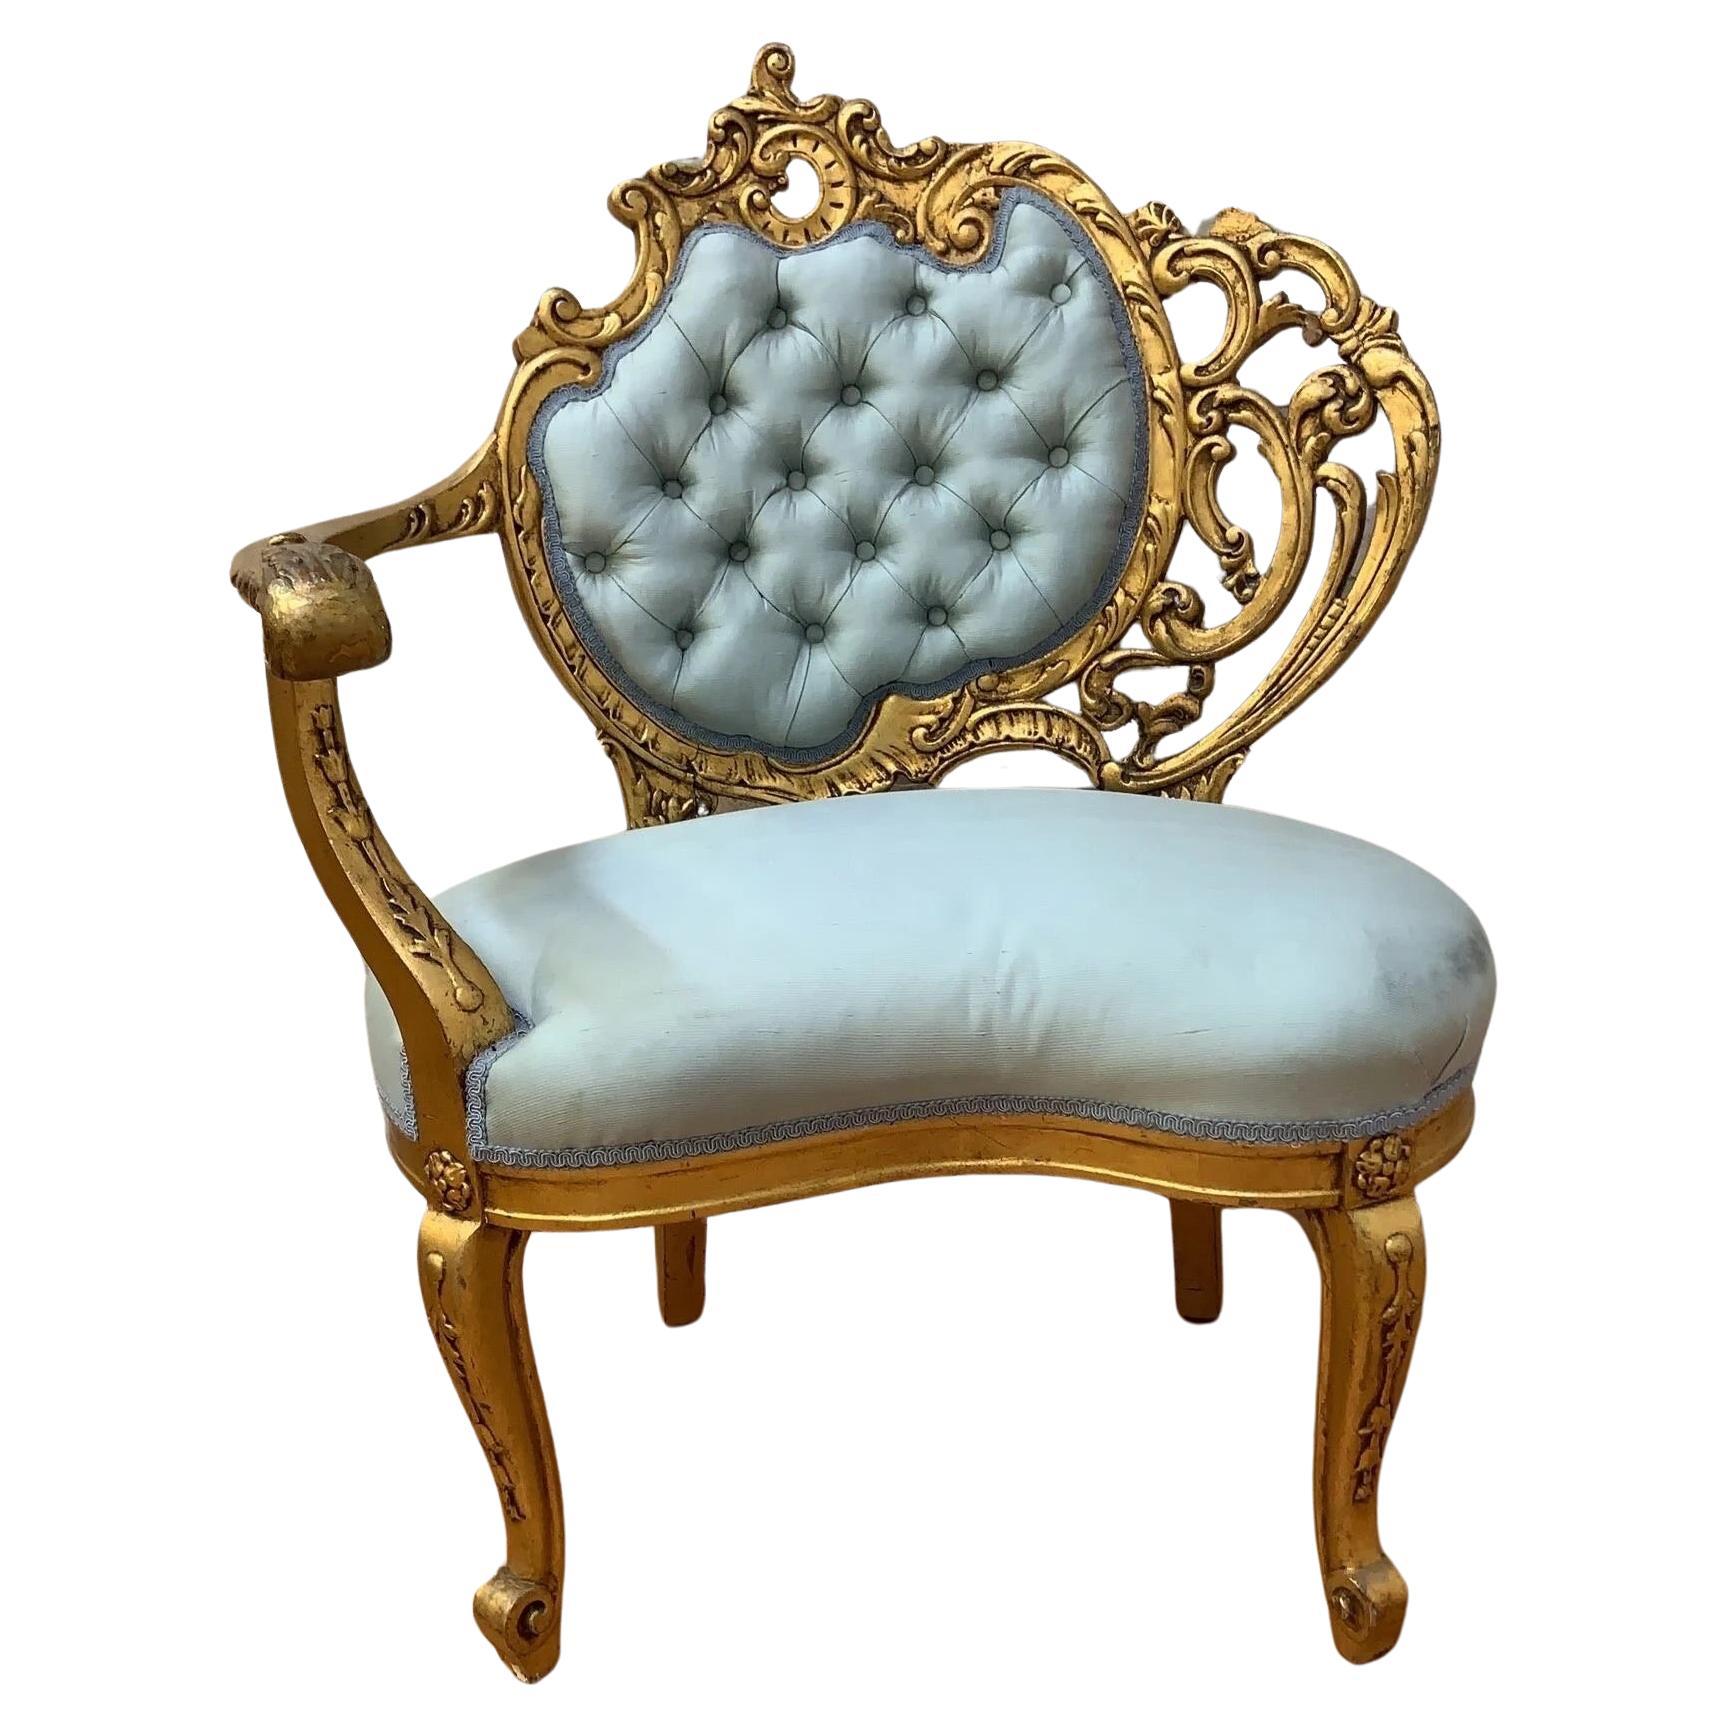 Vintage French Asymmetrical Gold-Gilded Baroque Revival Tufted Accent Chair